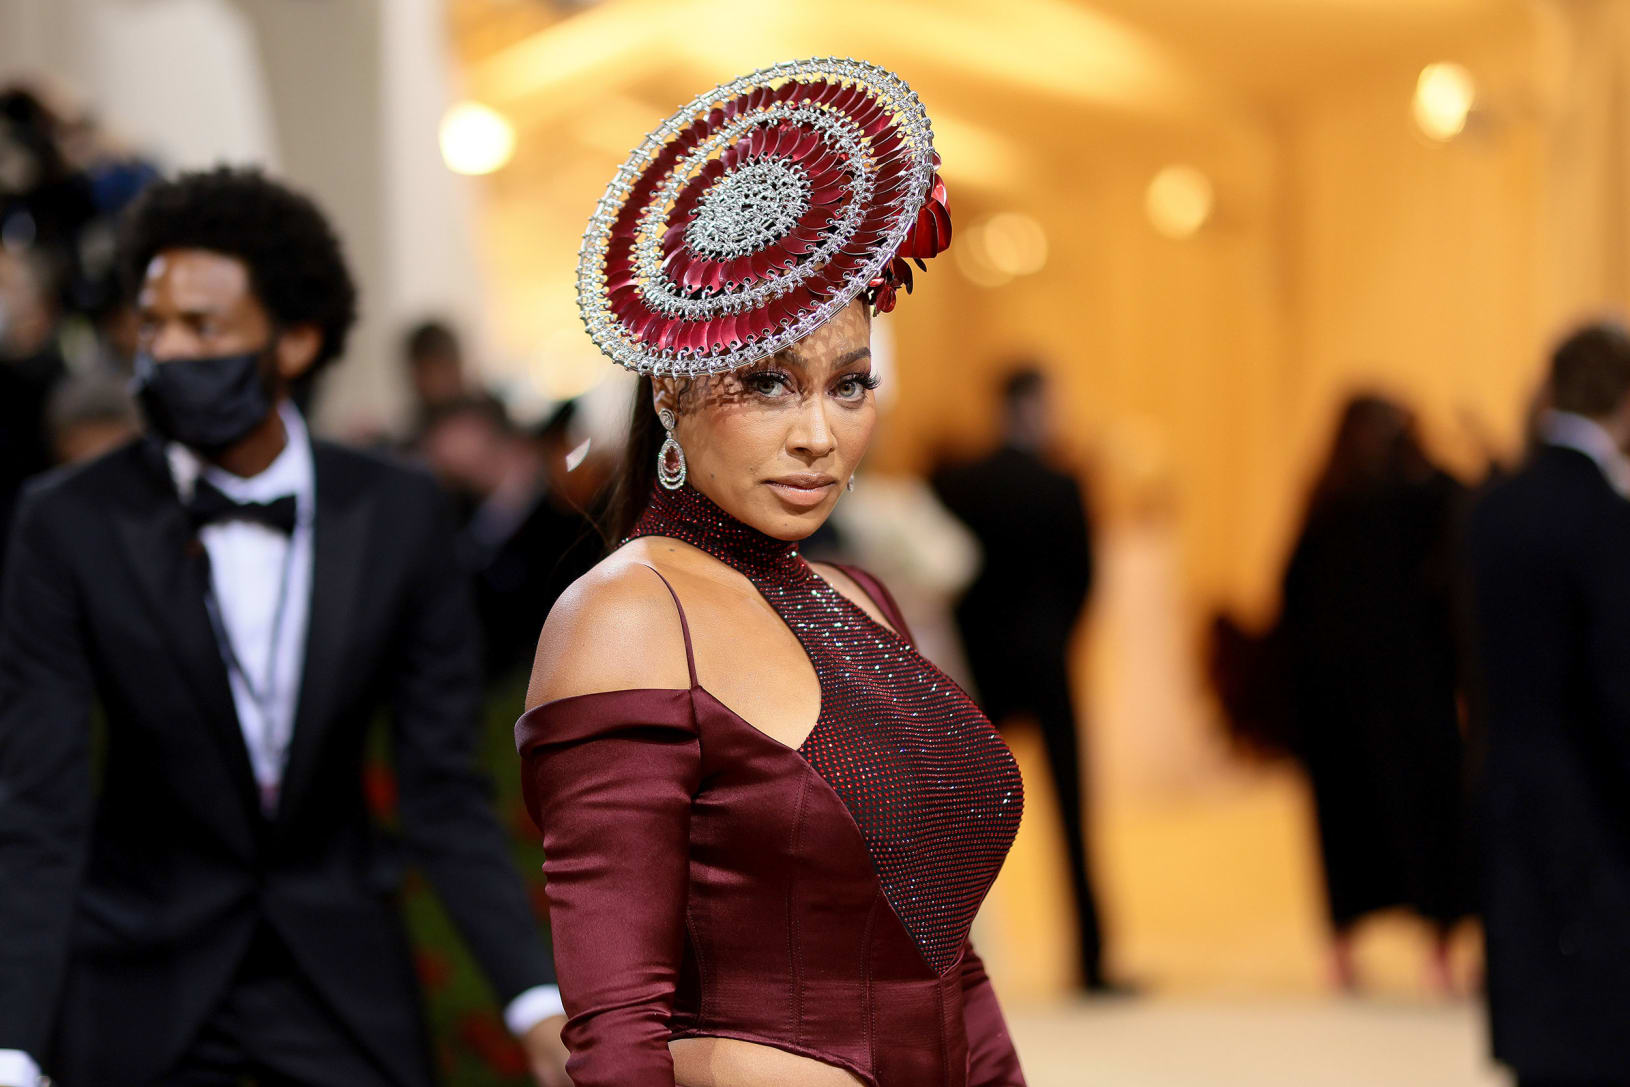 LaLa Anthony arrived in a burgundy high-slit two-piece ensemble by LaQuan Smith with decadent jewelry and intricate headpiece.